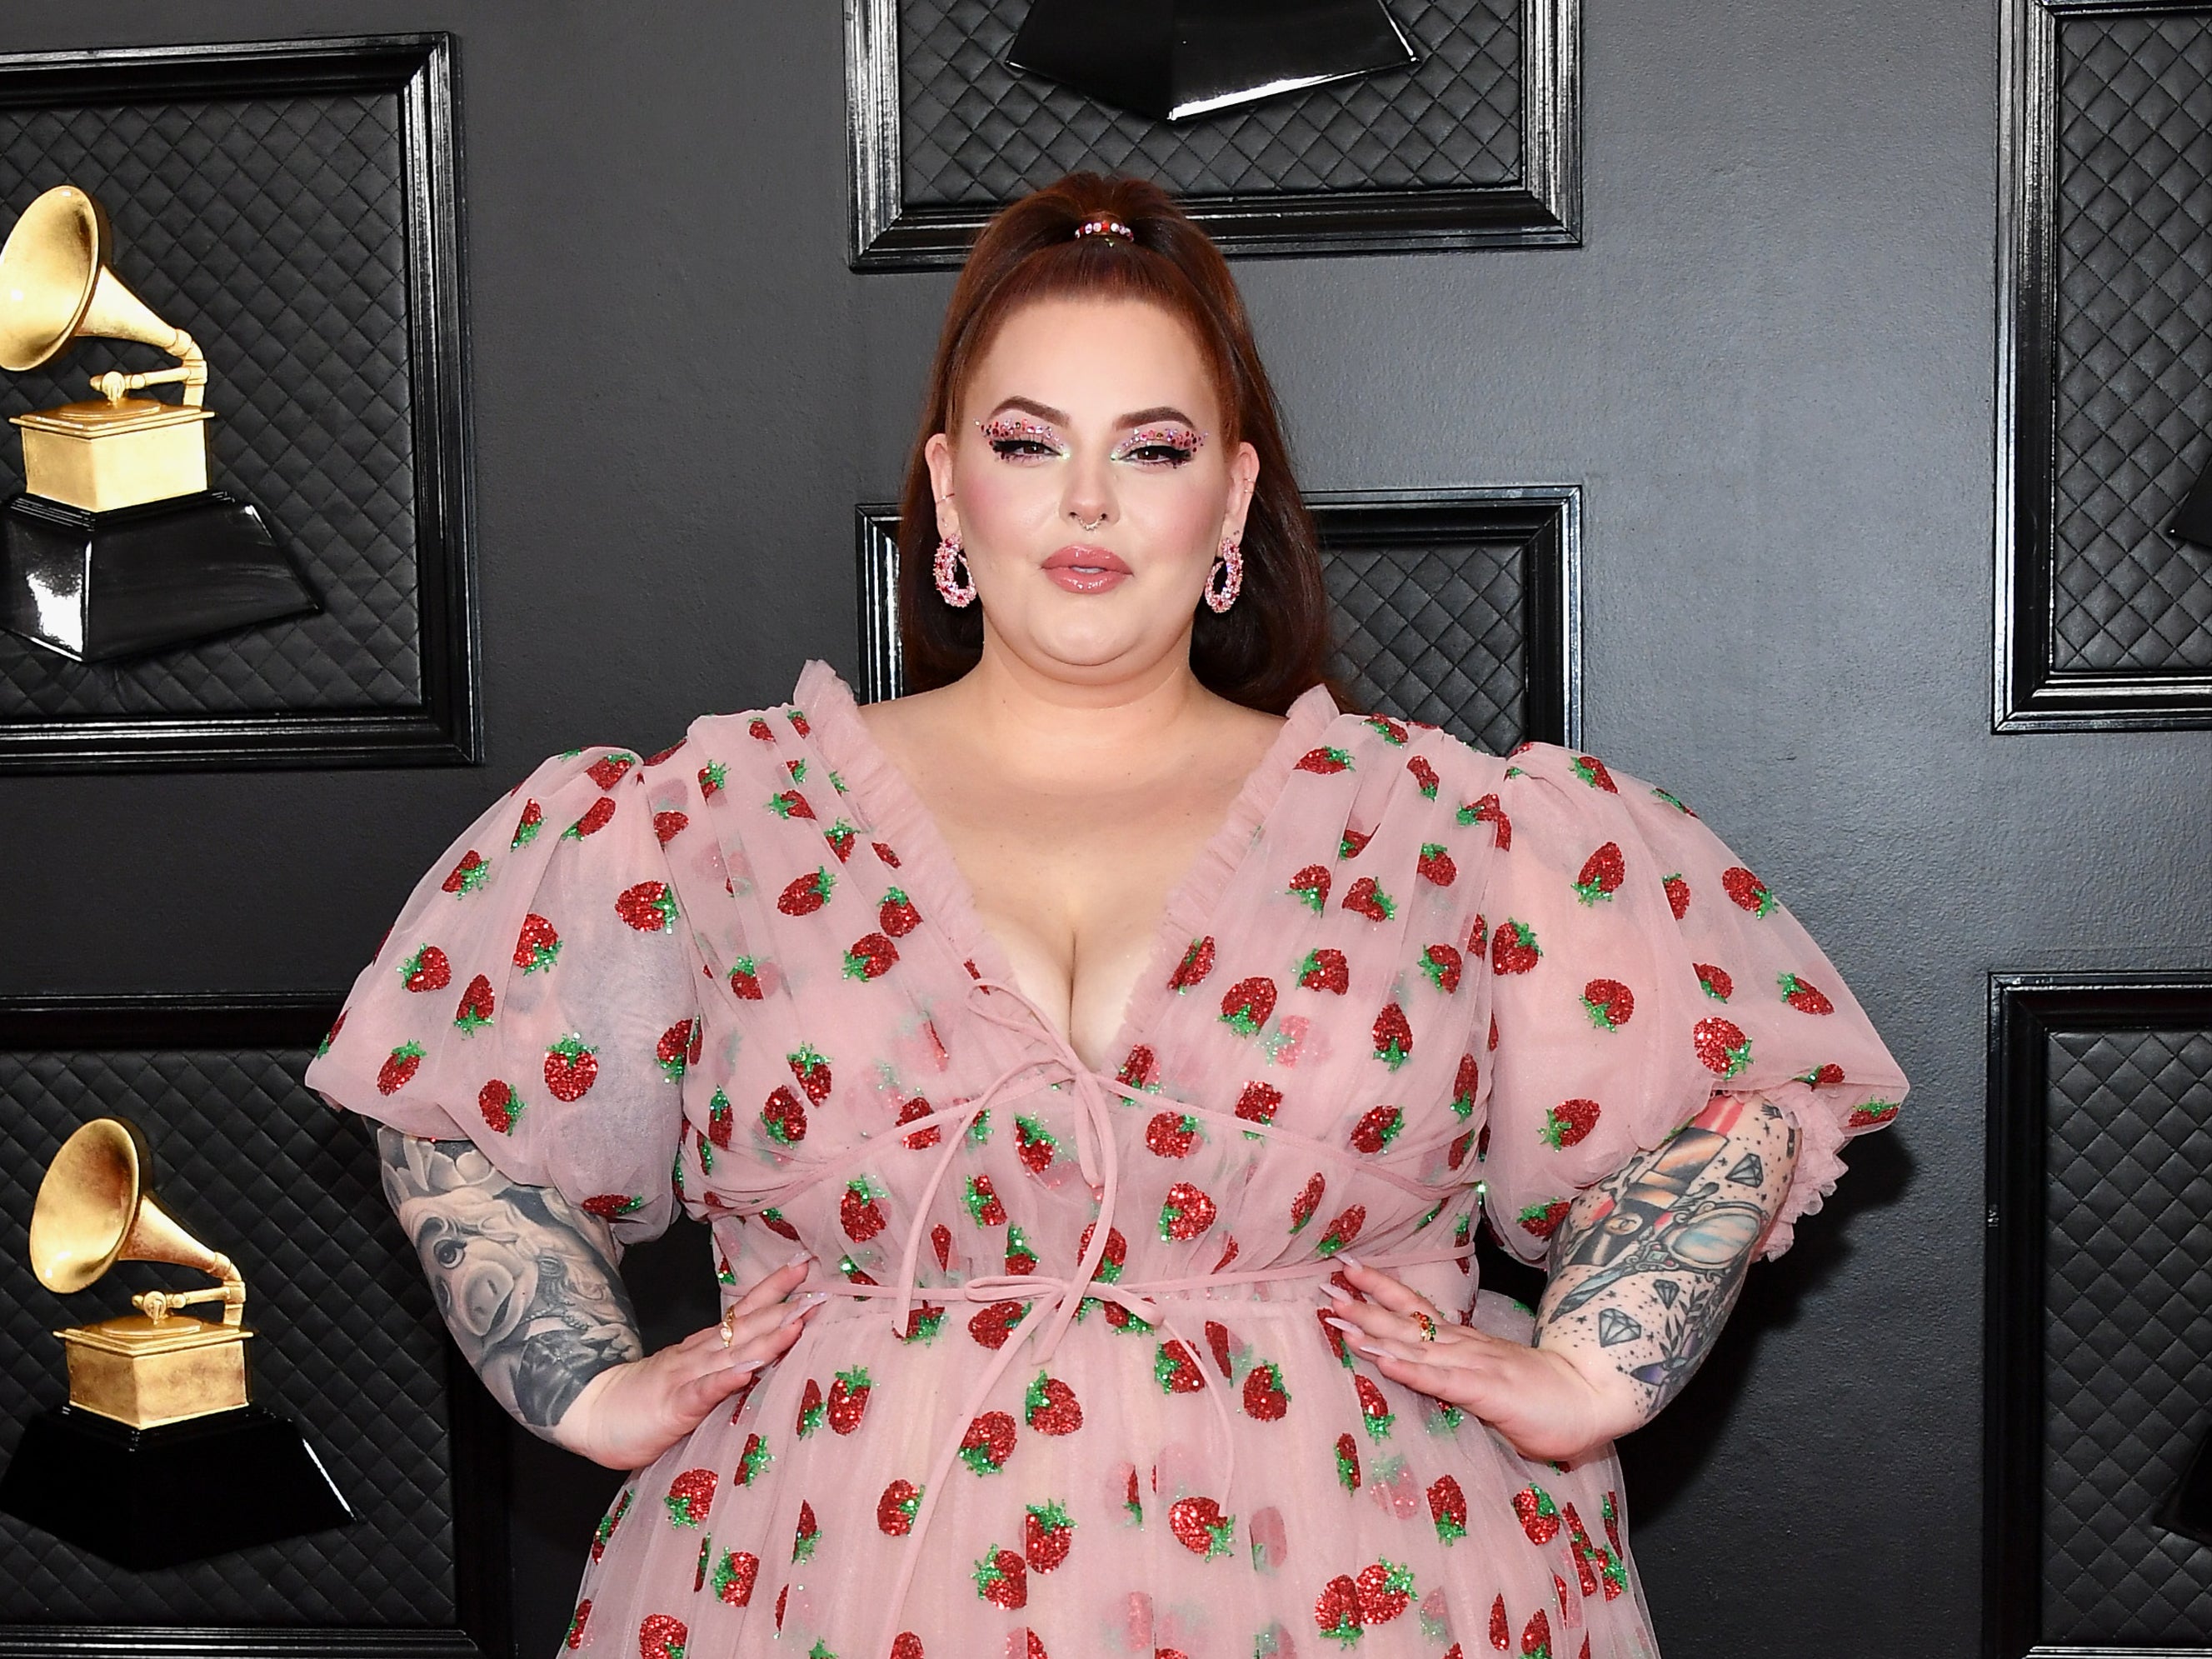 Who Is Tess Holliday?